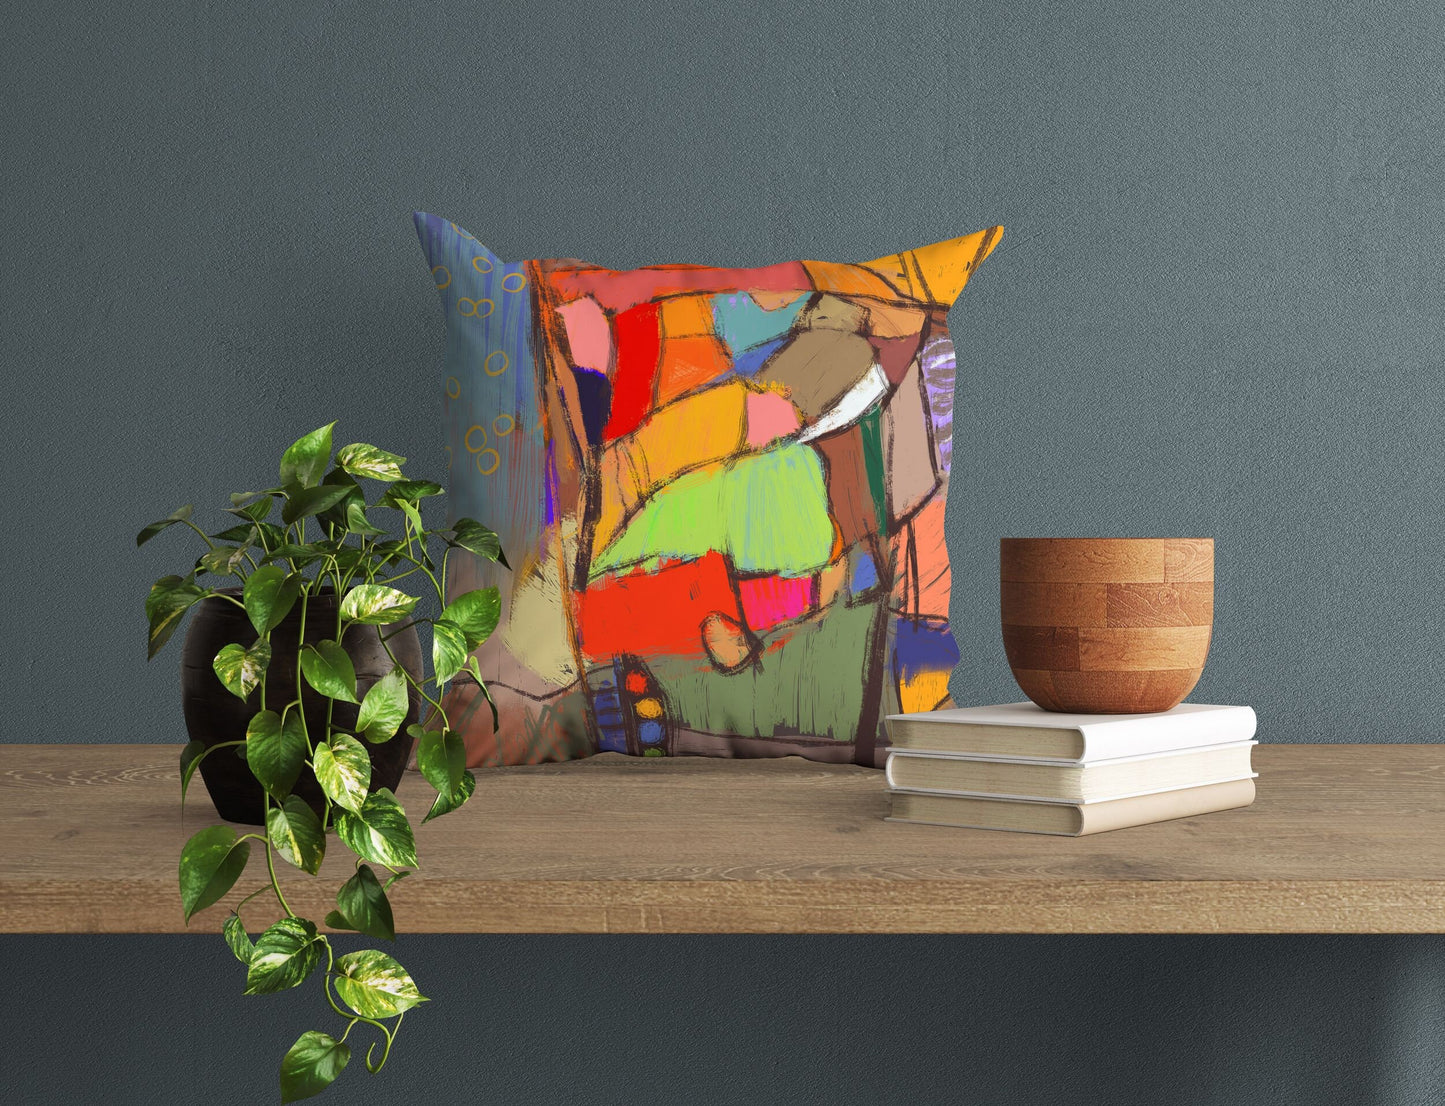 Abstract Throw Pillow, Designer Pillow, Colorful Pillow Case, Contemporary Pillow, Large Pillow Cases, Playroom Decor, Holiday Gift